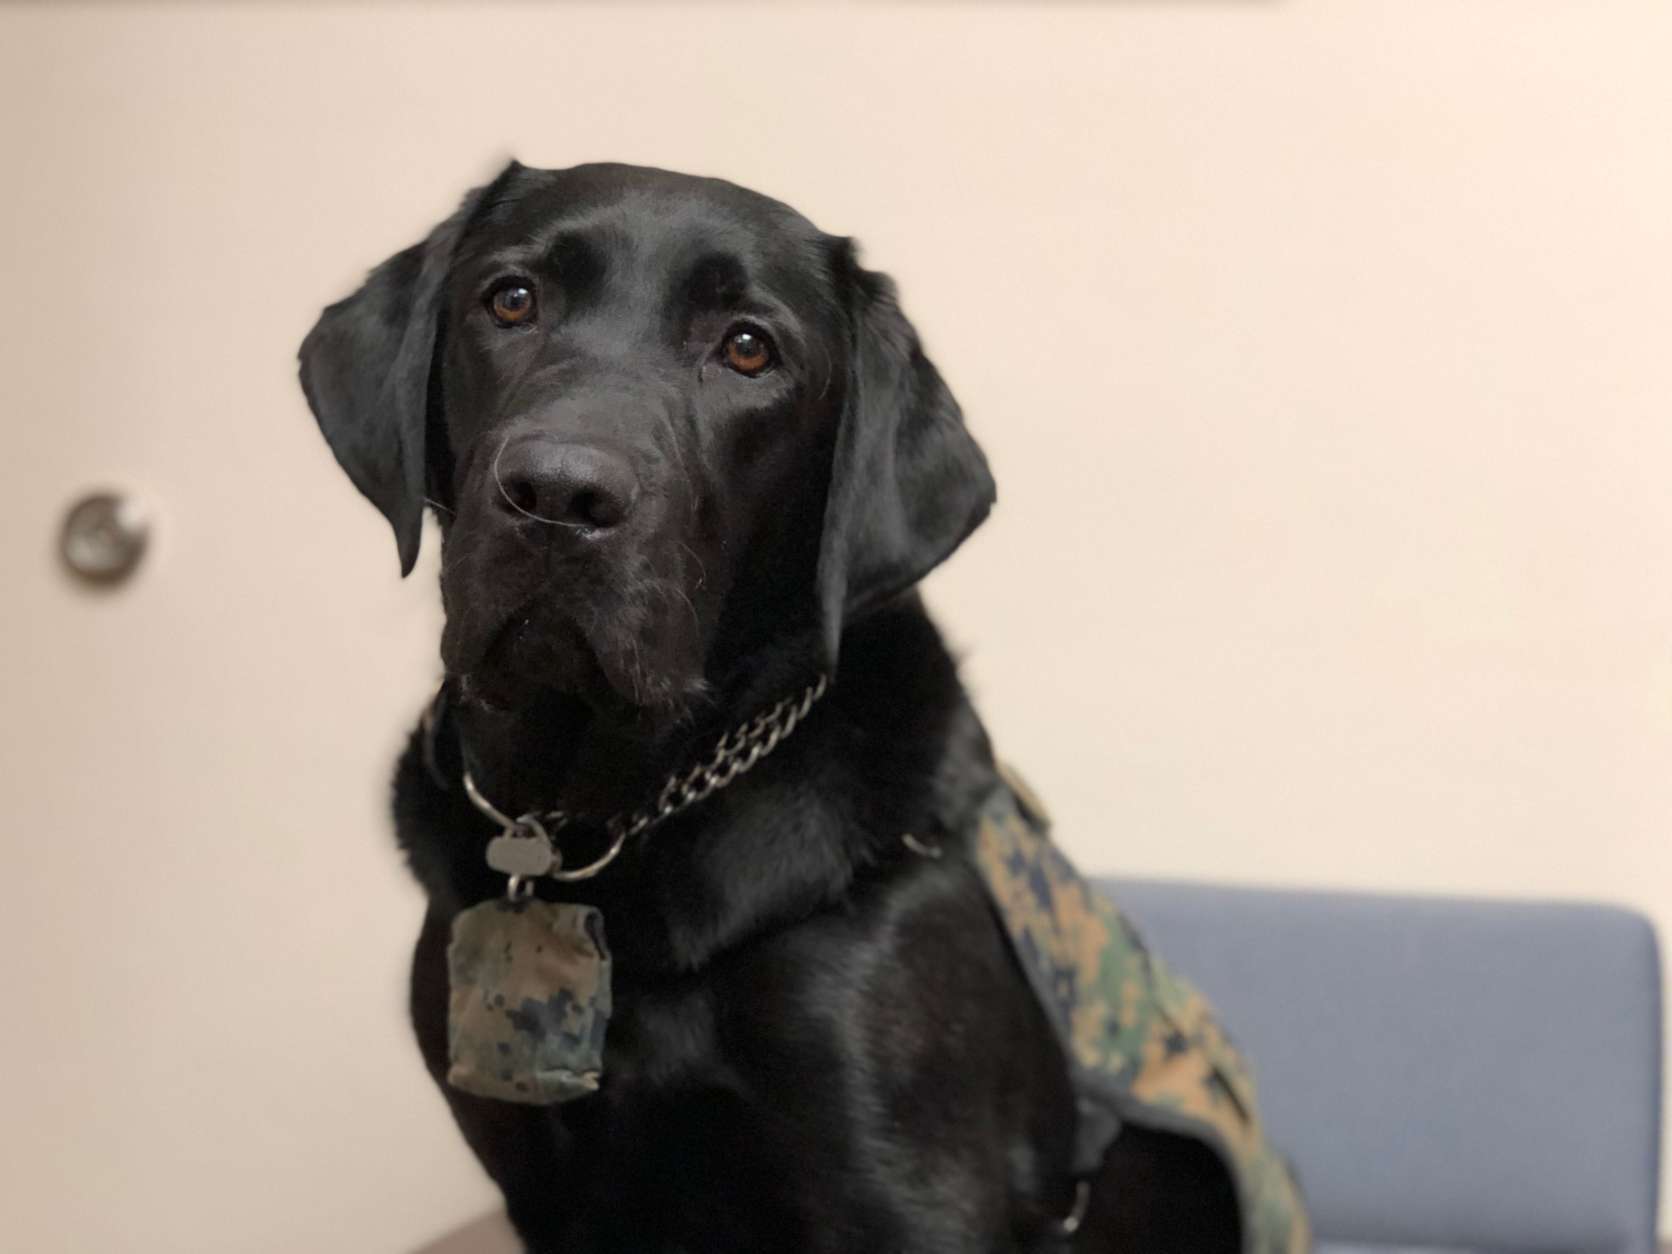 Dillon is a task-oriented member of the facility dogs at Walter Reed National Medical Center. (WTOP/Kate Ryan)